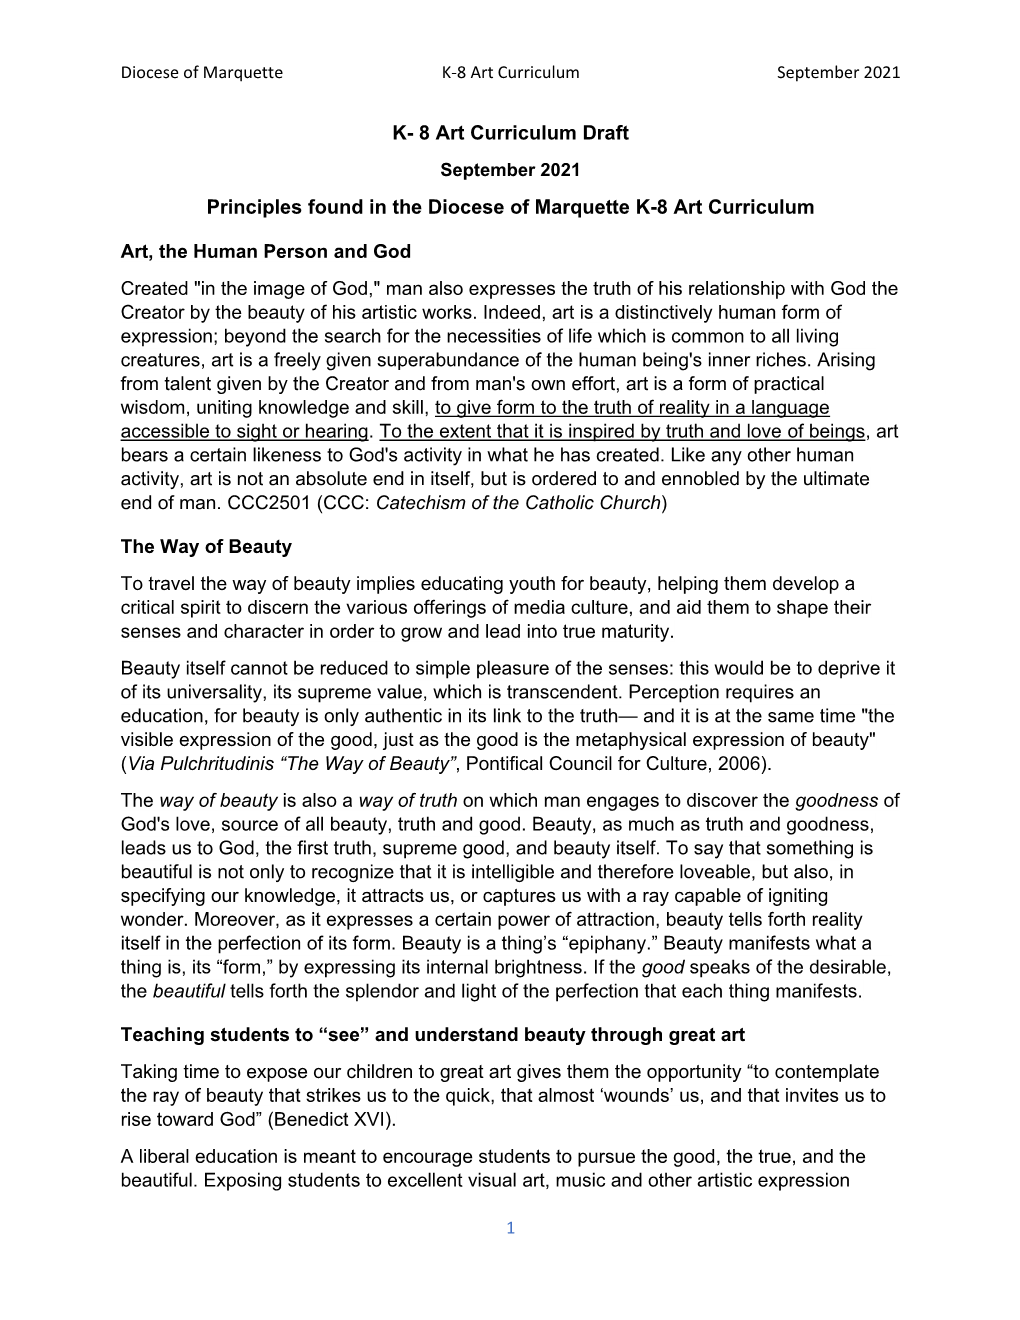 K- 8 Art Curriculum Draft September 2021 Principles Found in the Diocese of Marquette K-8 Art Curriculum